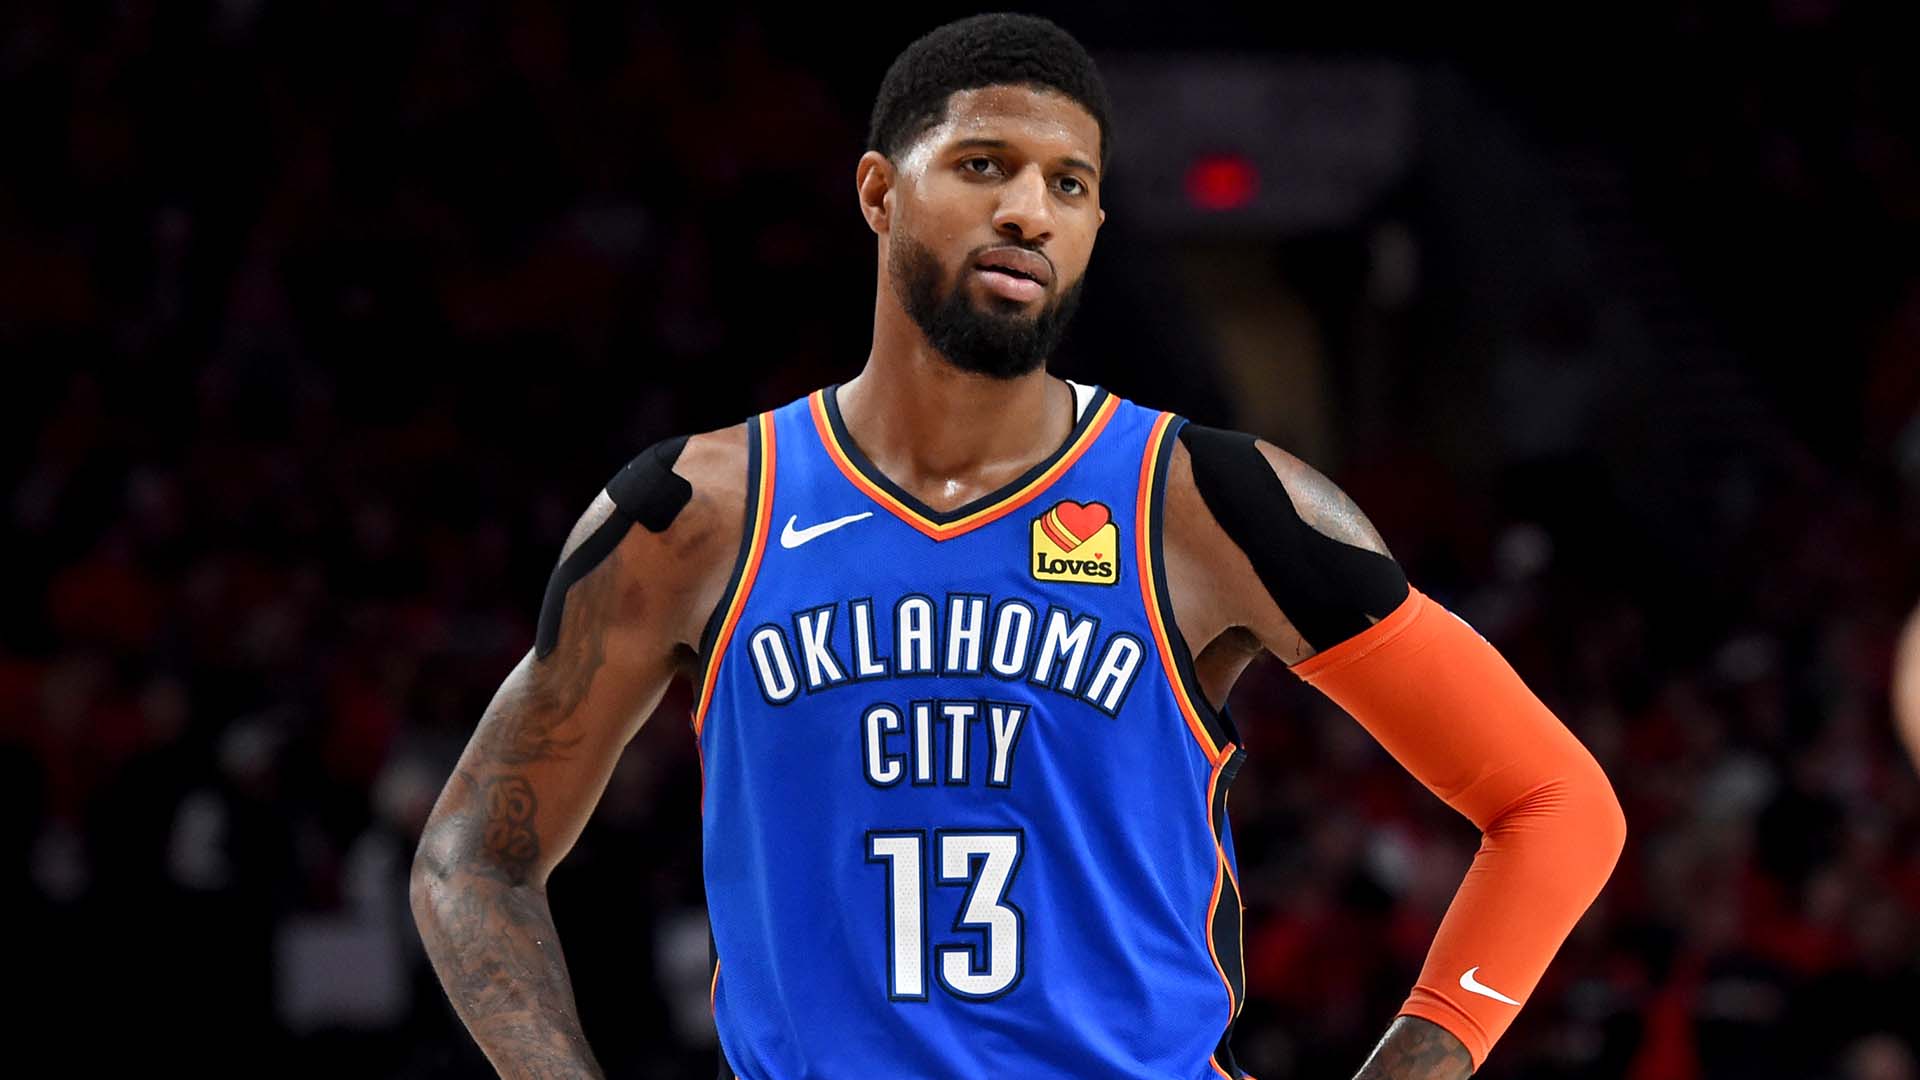 Report: Los Angeles Clippers acquire All-Star Paul George in record